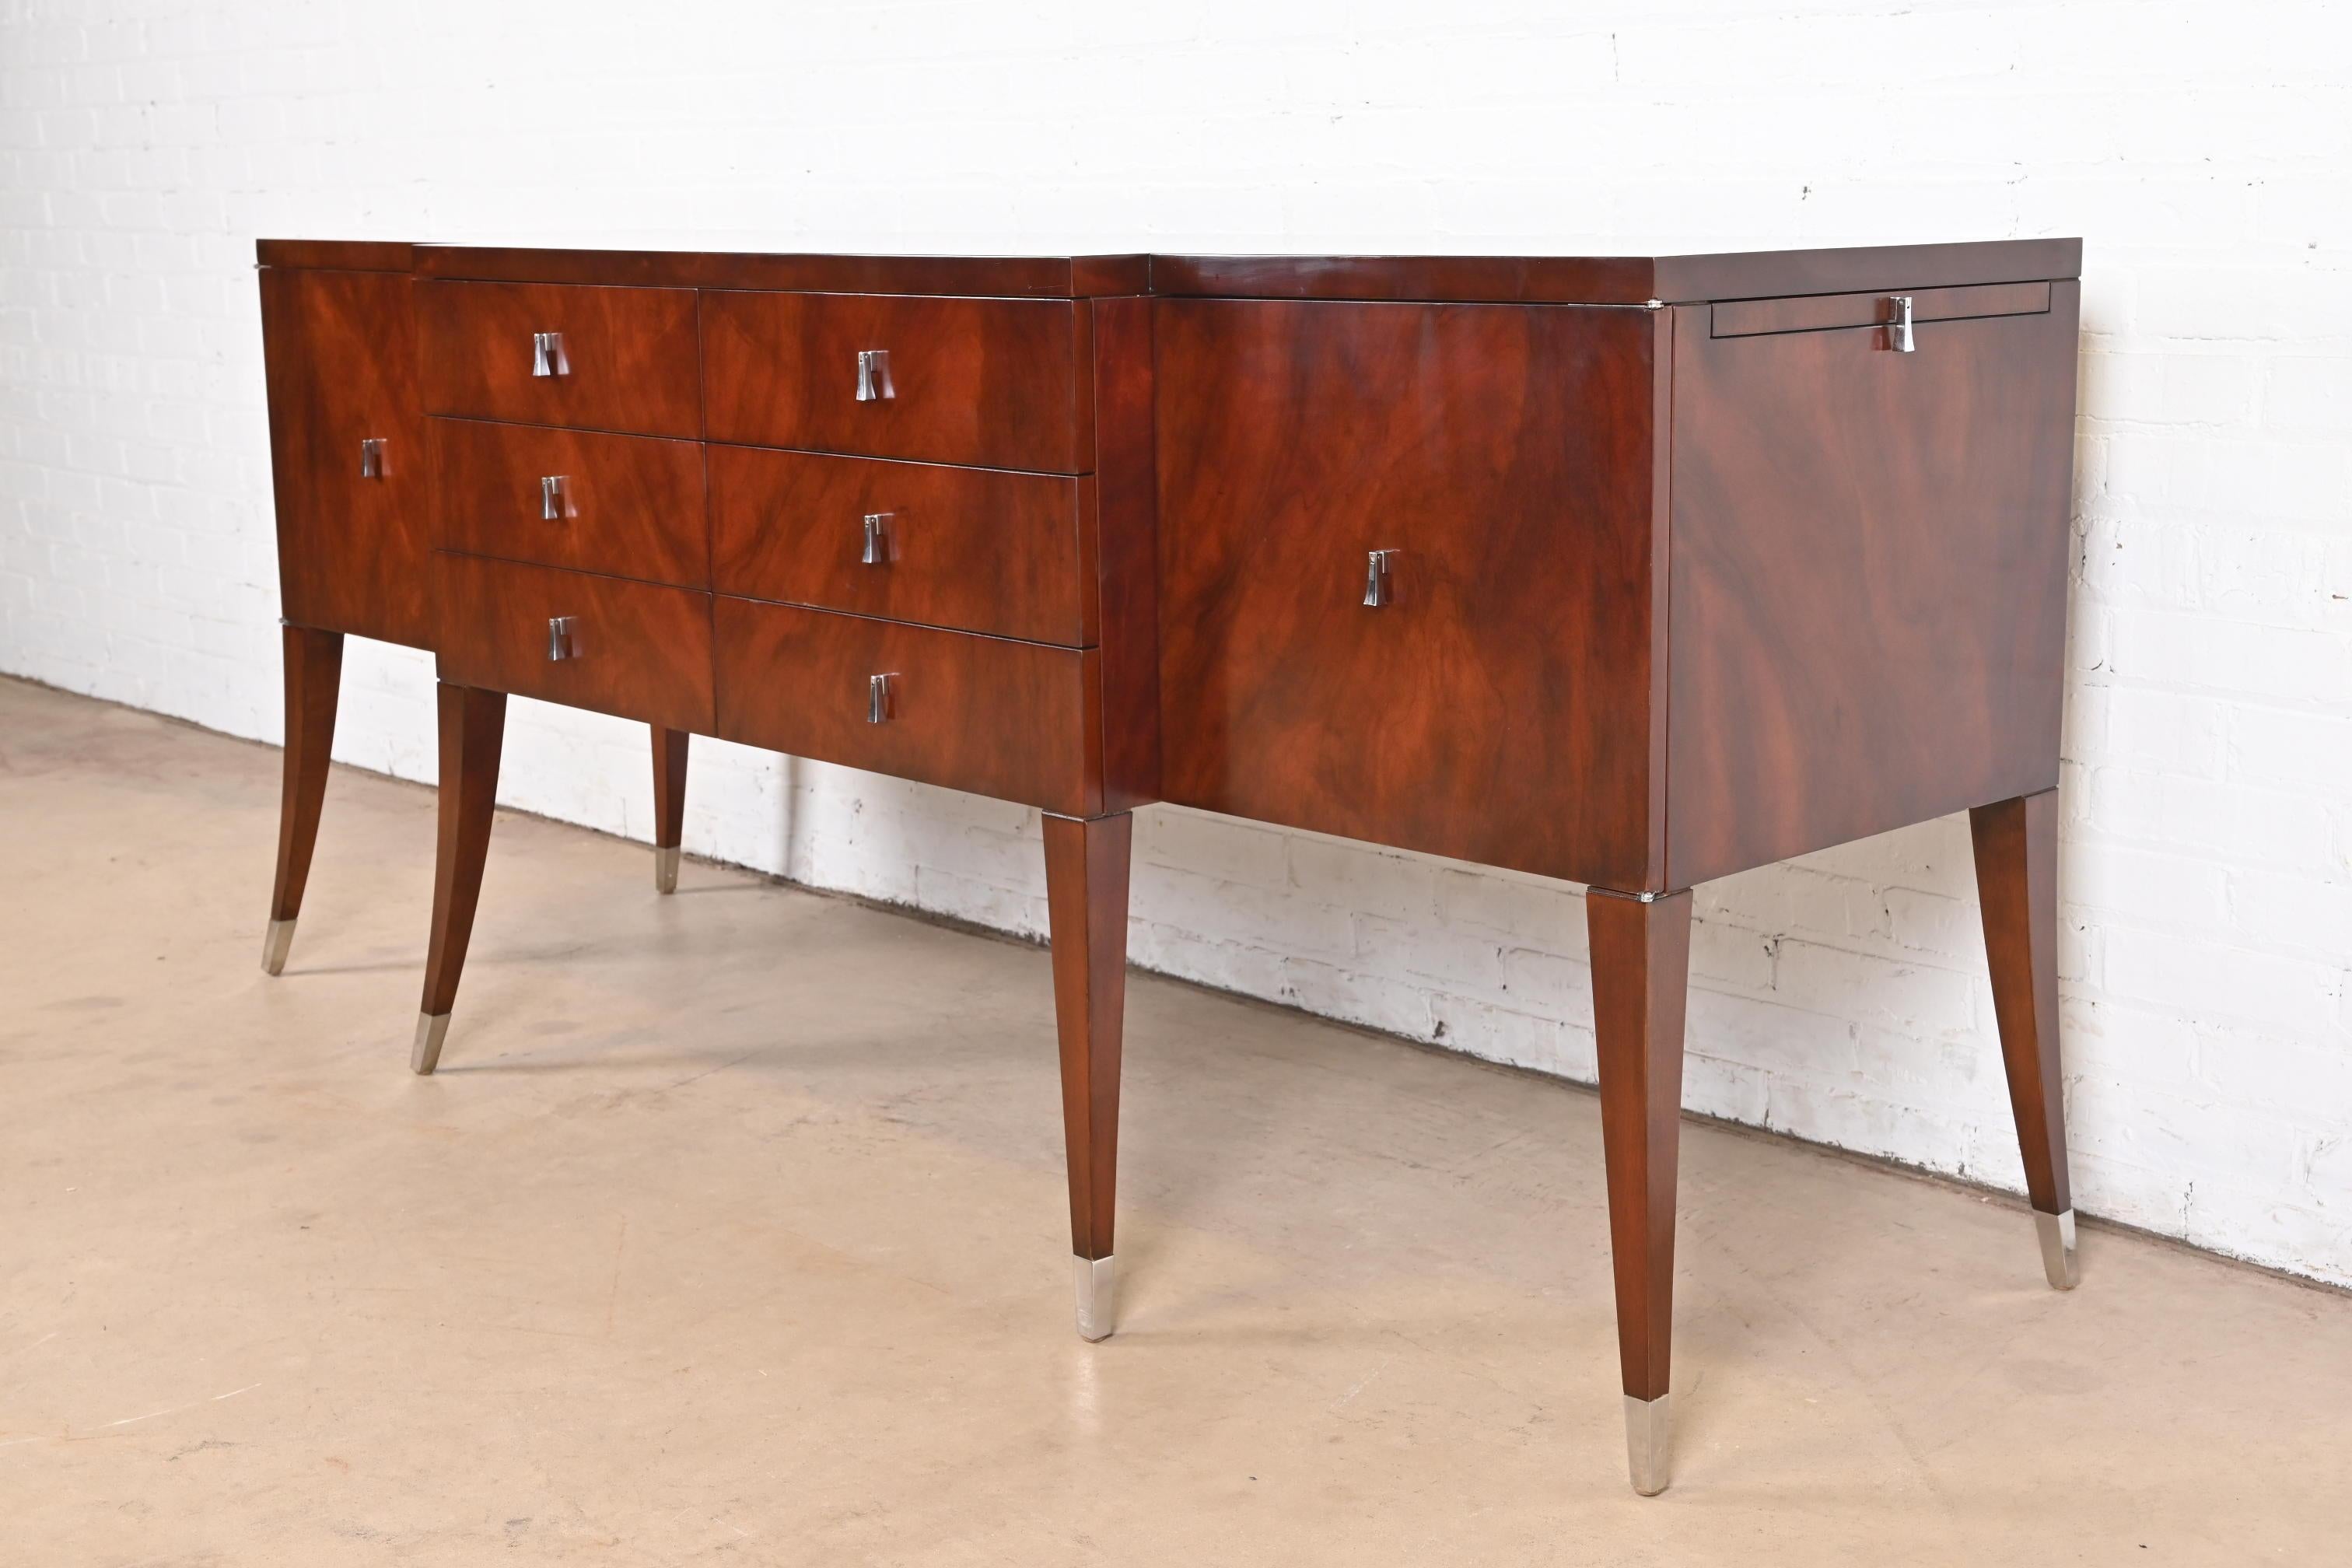 Michael Vanderbyl Modern Regency Flame Mahogany Sideboard Credenza or Buffet In Good Condition For Sale In South Bend, IN